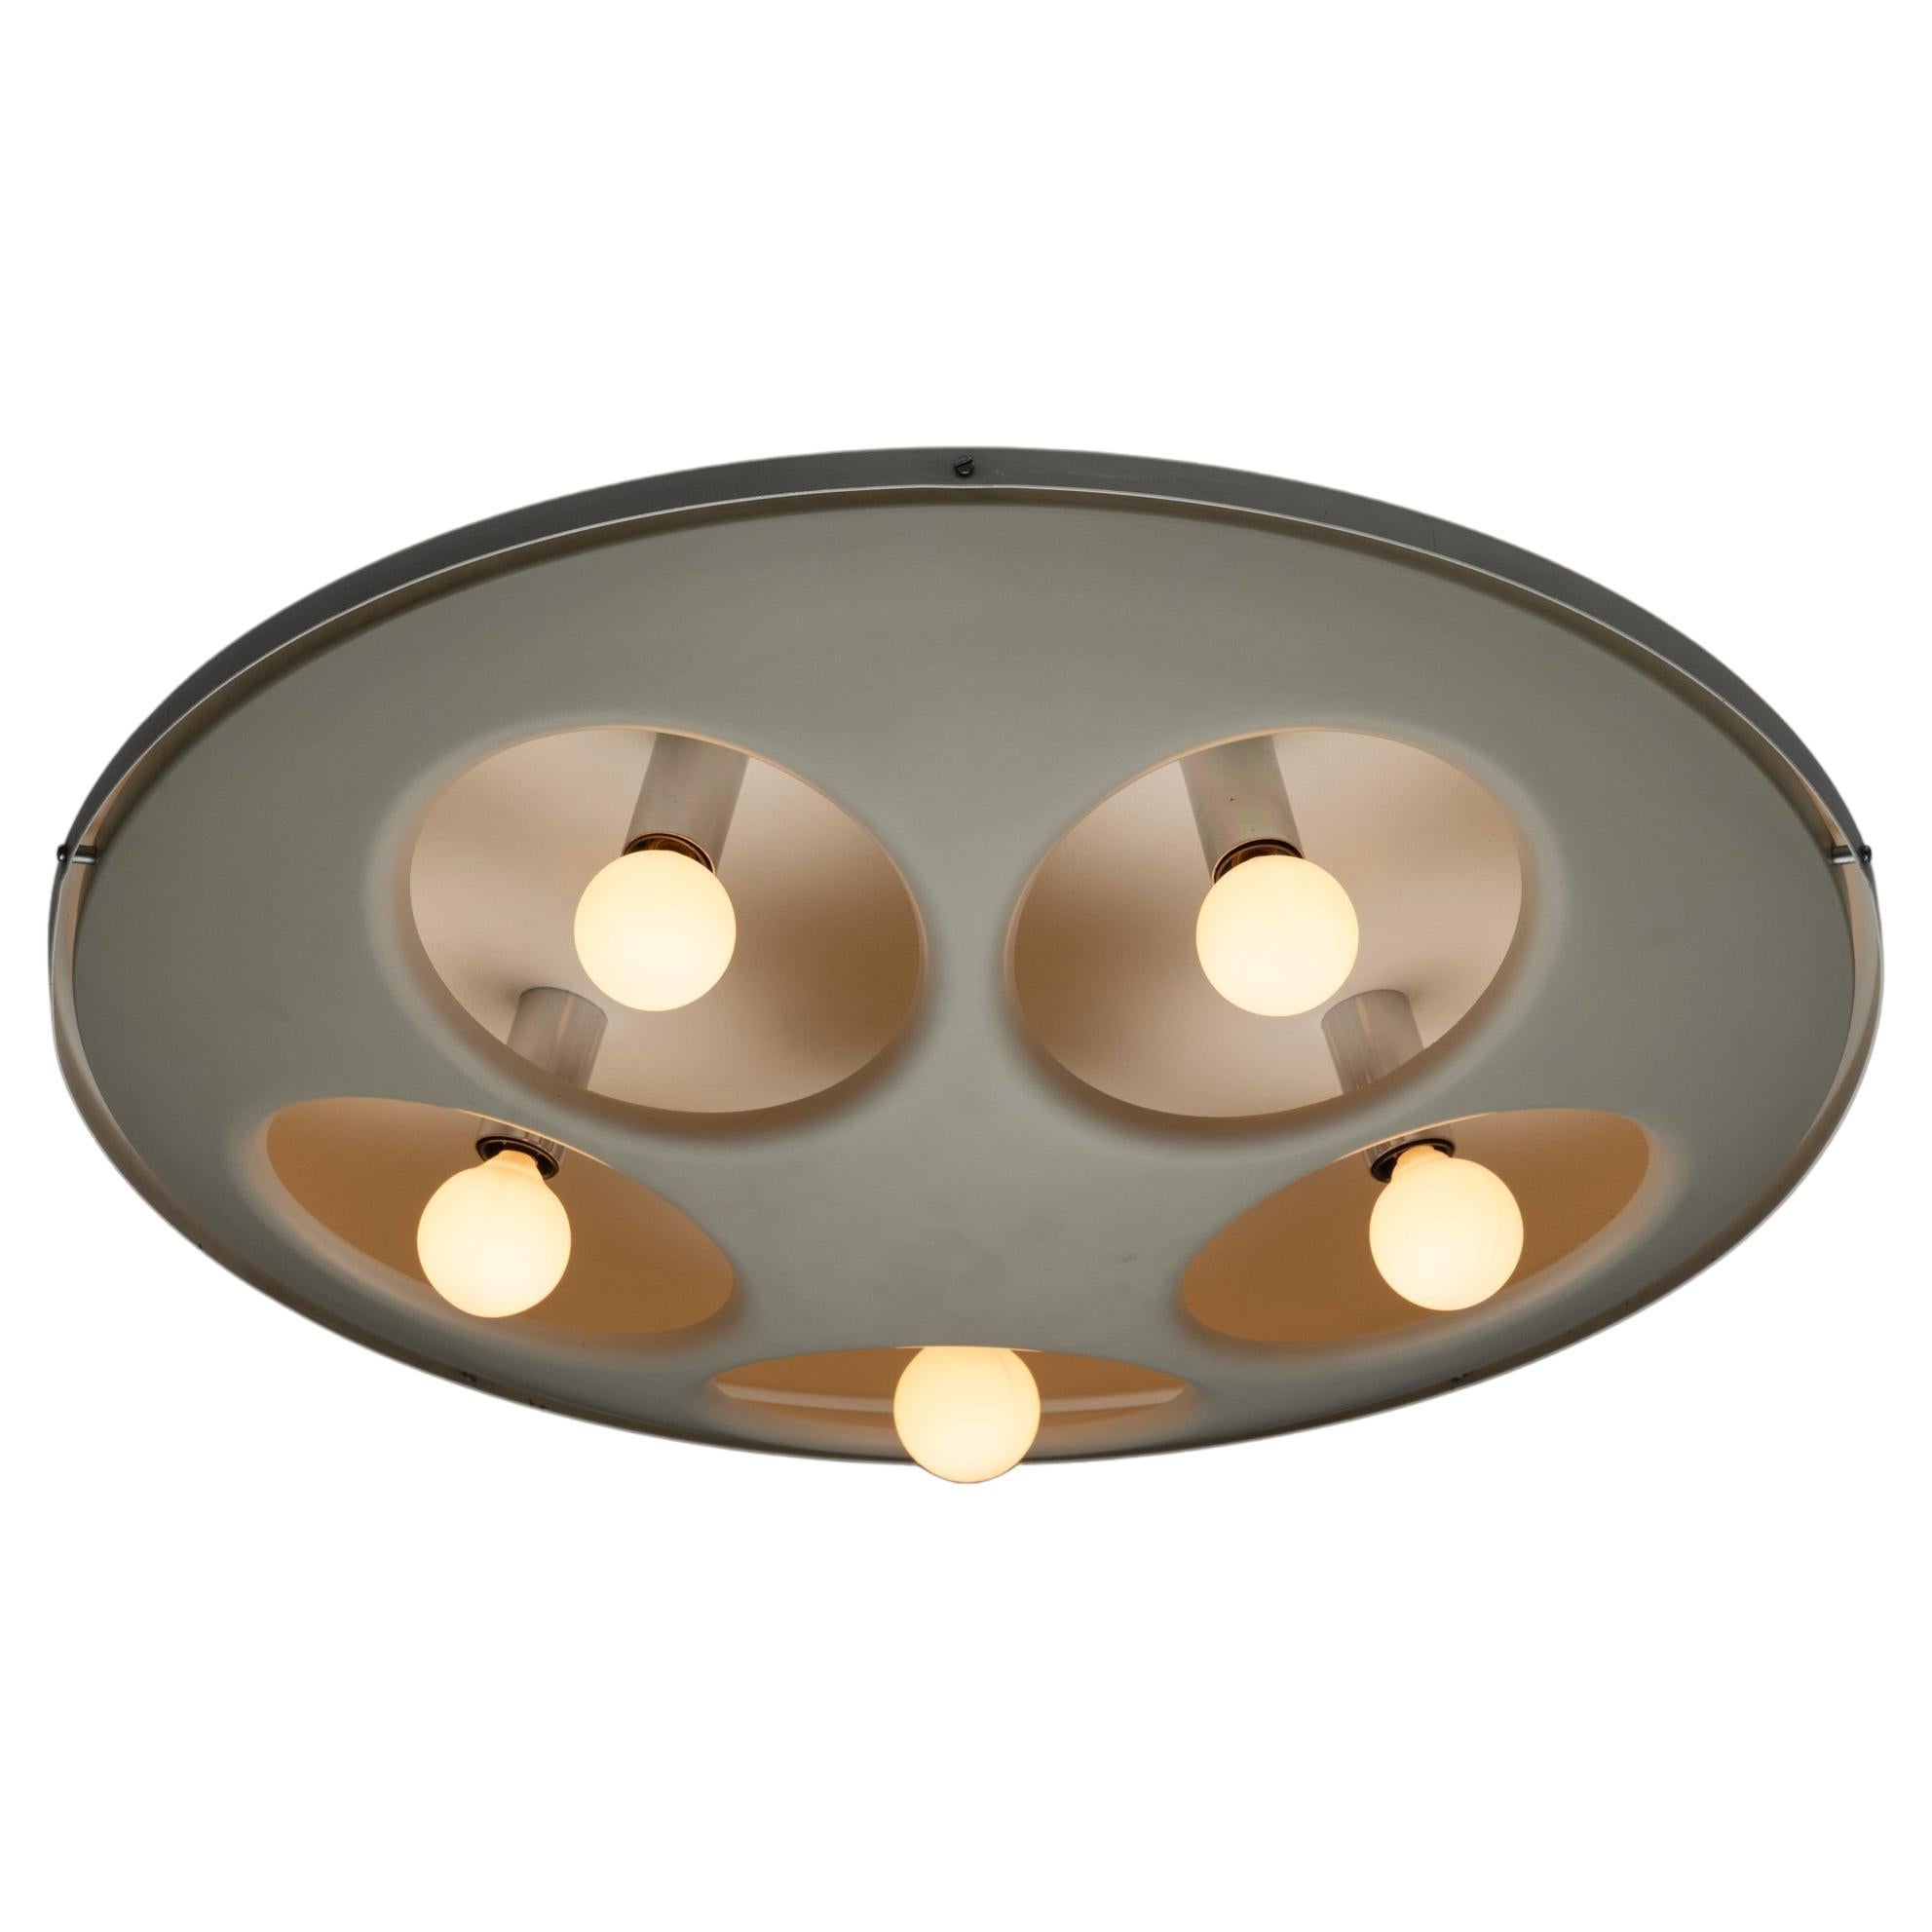 Ceiling Mount by Stilnovo. Designed and manufactured in Italy, circa 1960s. Space Age style with a very stable color finish, given its age. Authentic 